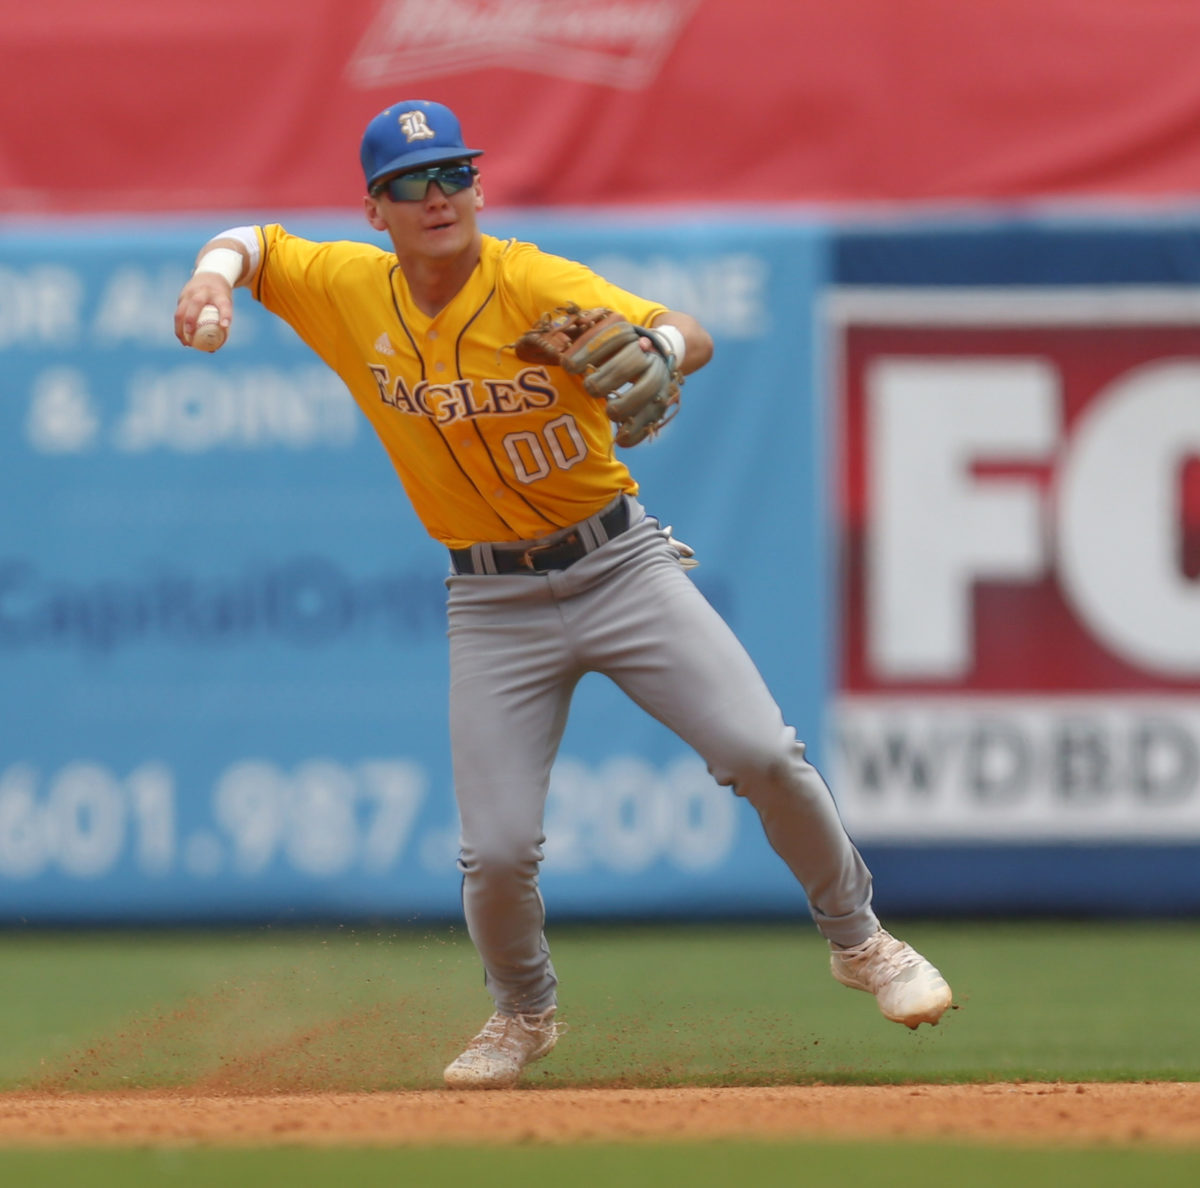 Resurrection's Will Clemens (00) prepares to throw the ball after fielding it in the second inning. Tupelo Christian and Resurrection played in game 2 of the MHSAA Class 1A Baseball Championship on Thursday, June 3, 2021 at Trustmark Park. Photo by Keith Warren